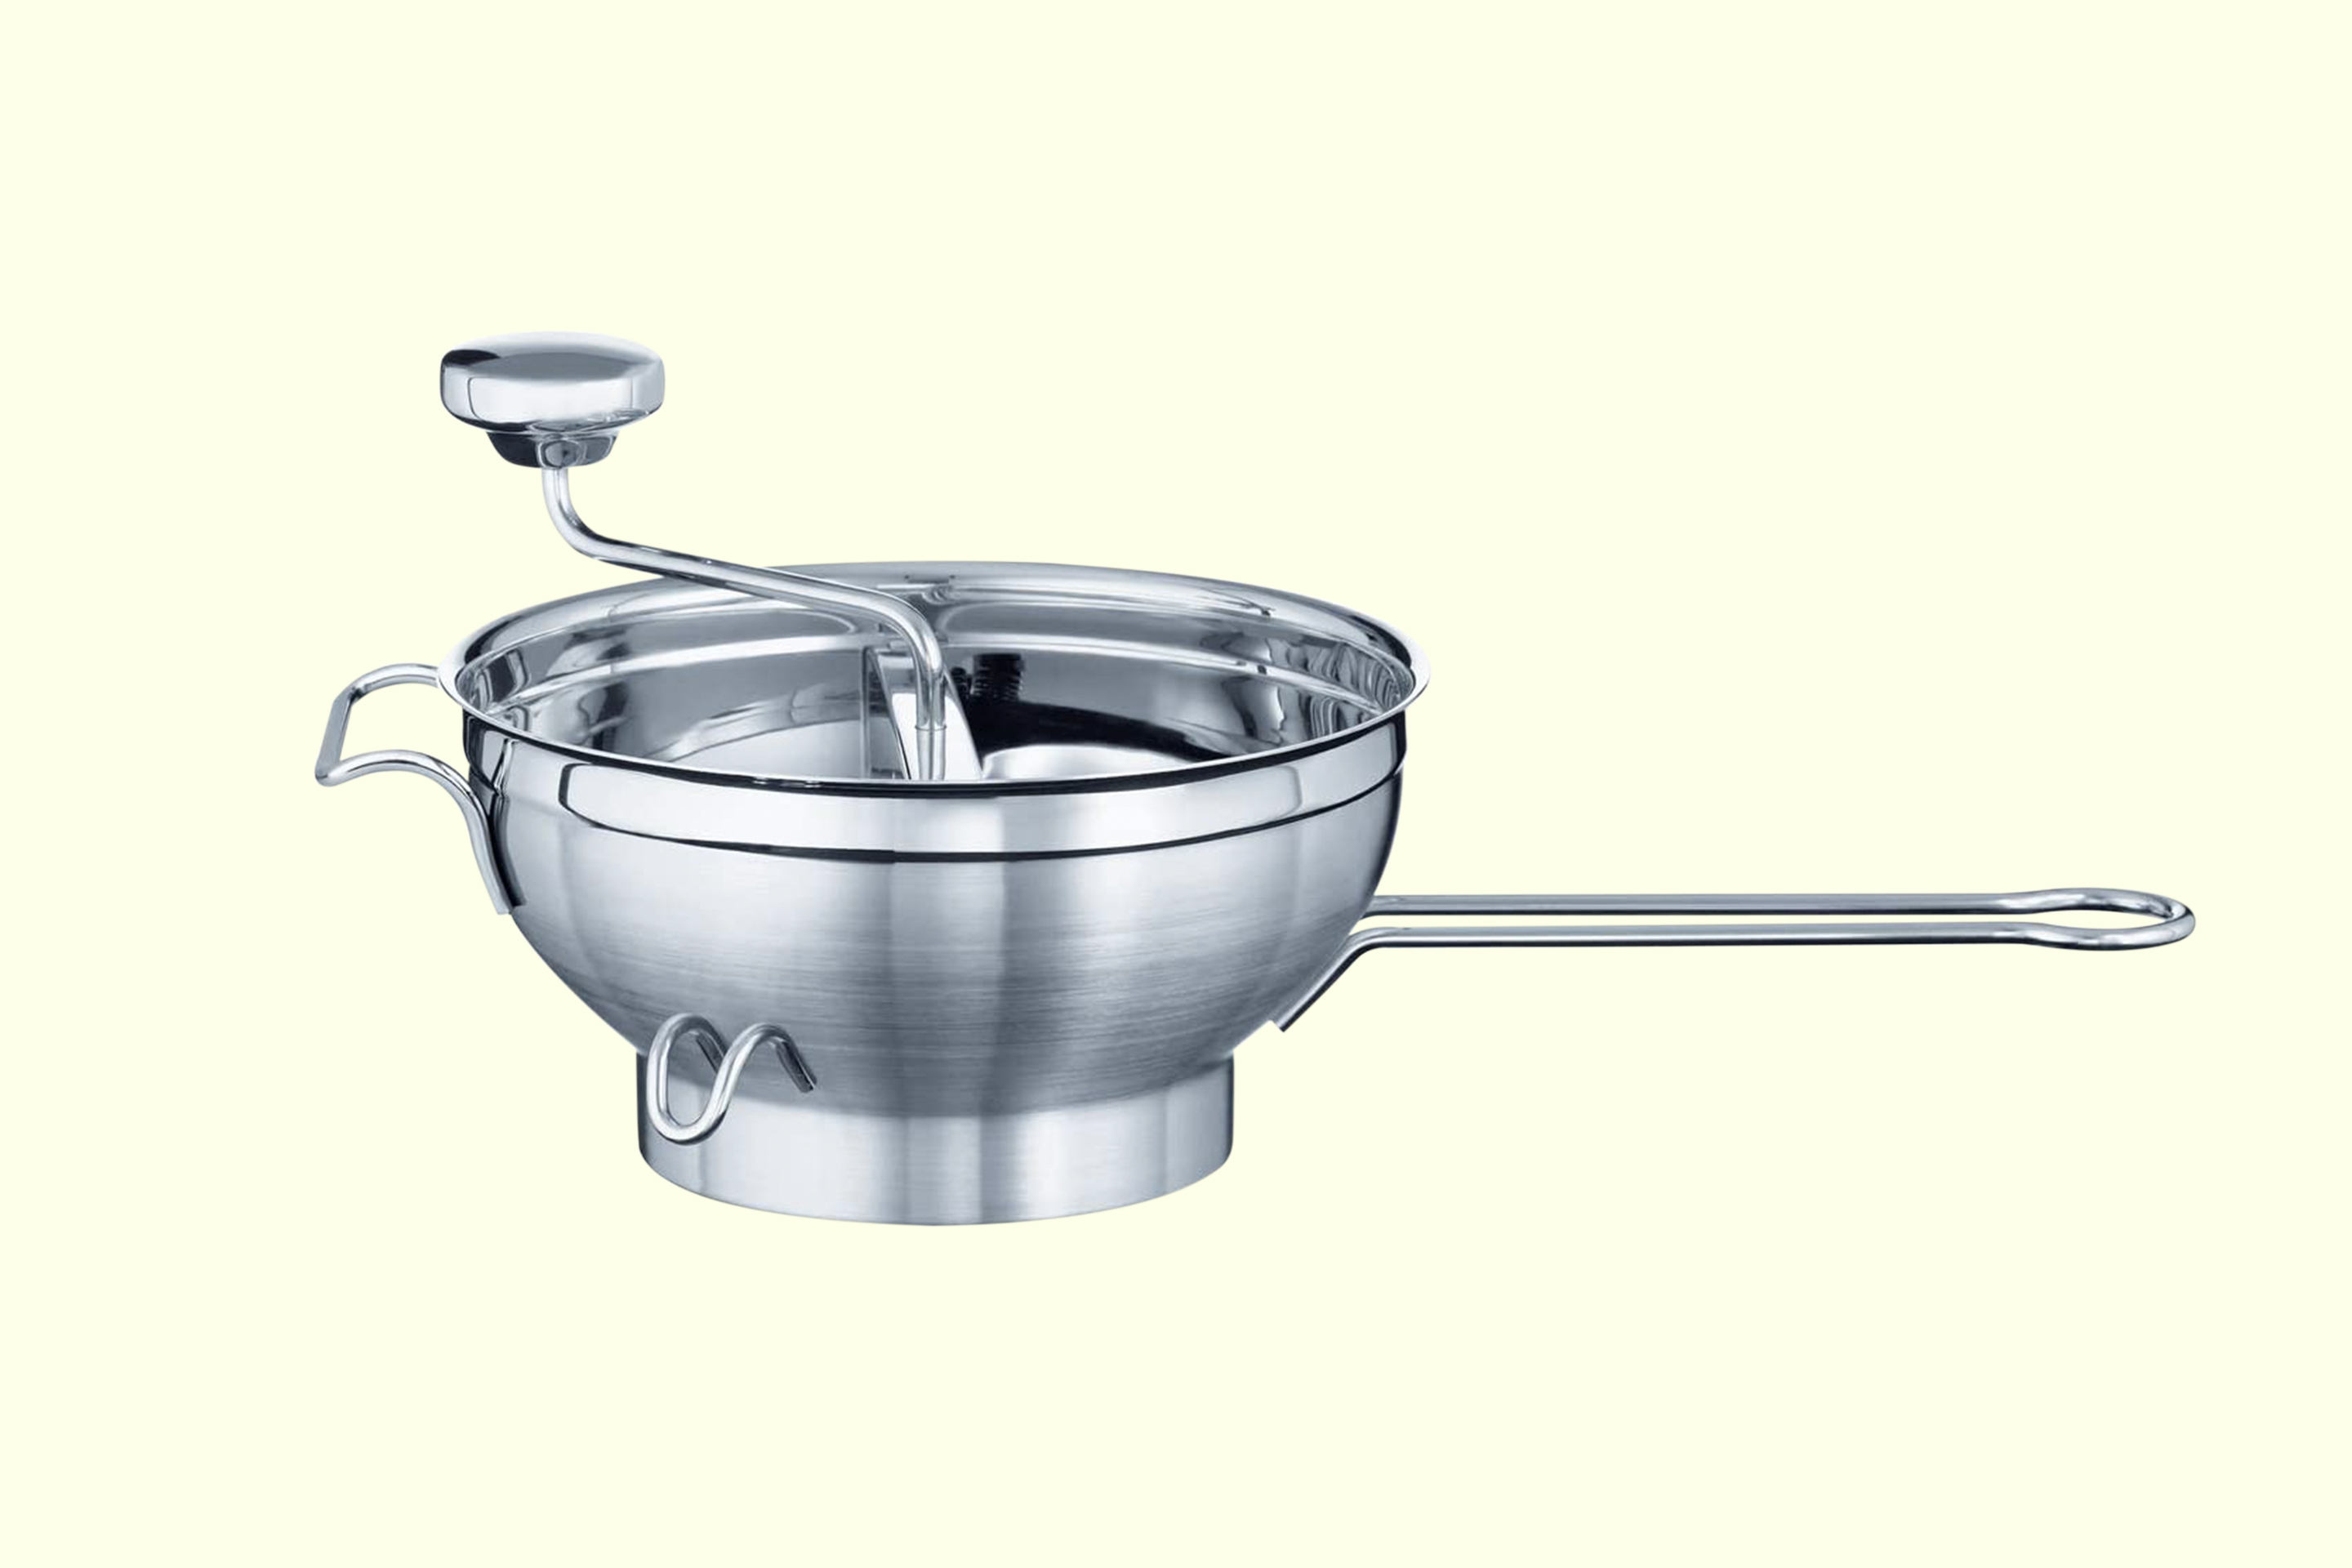 https://img.money.com/2021/07/Shopping-Ro%CC%88sle-Stainless-Steel-Food-Mill-with-Handle.jpg